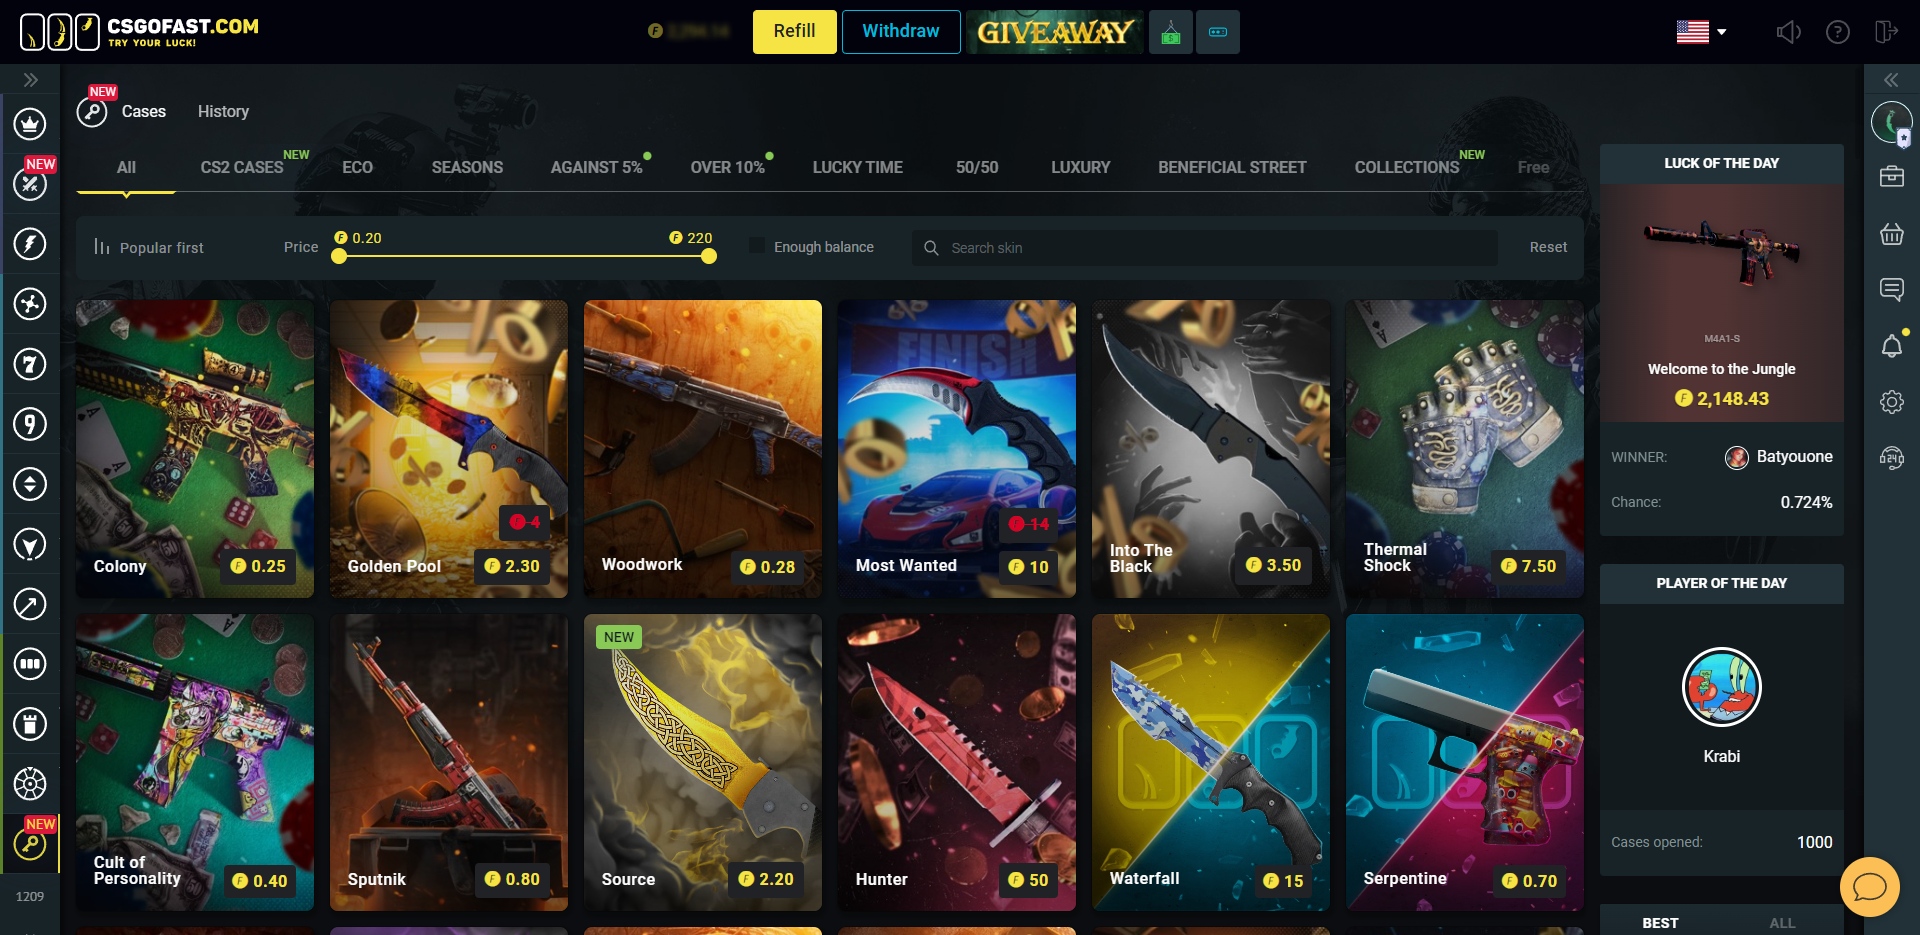 CSGOFast Case Opening Overview